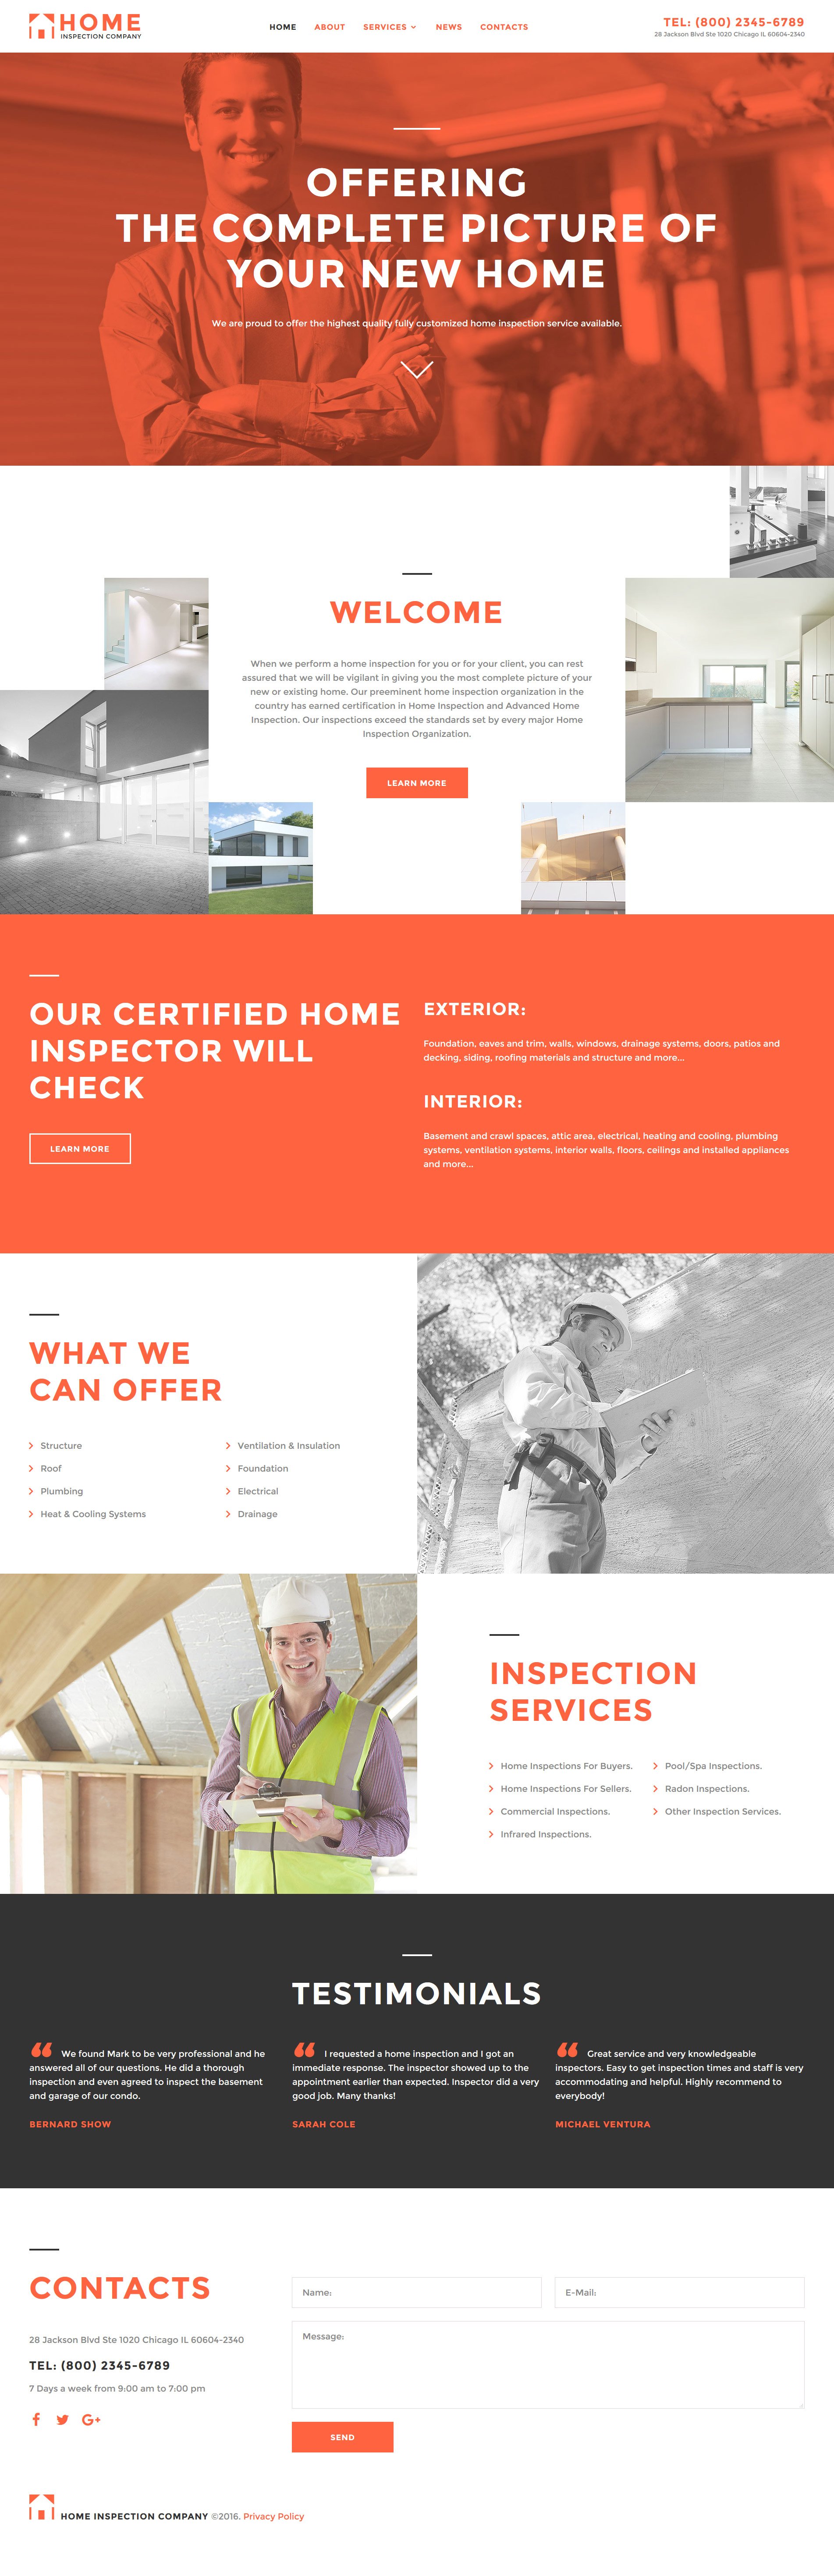 Home Inspection Website Templates